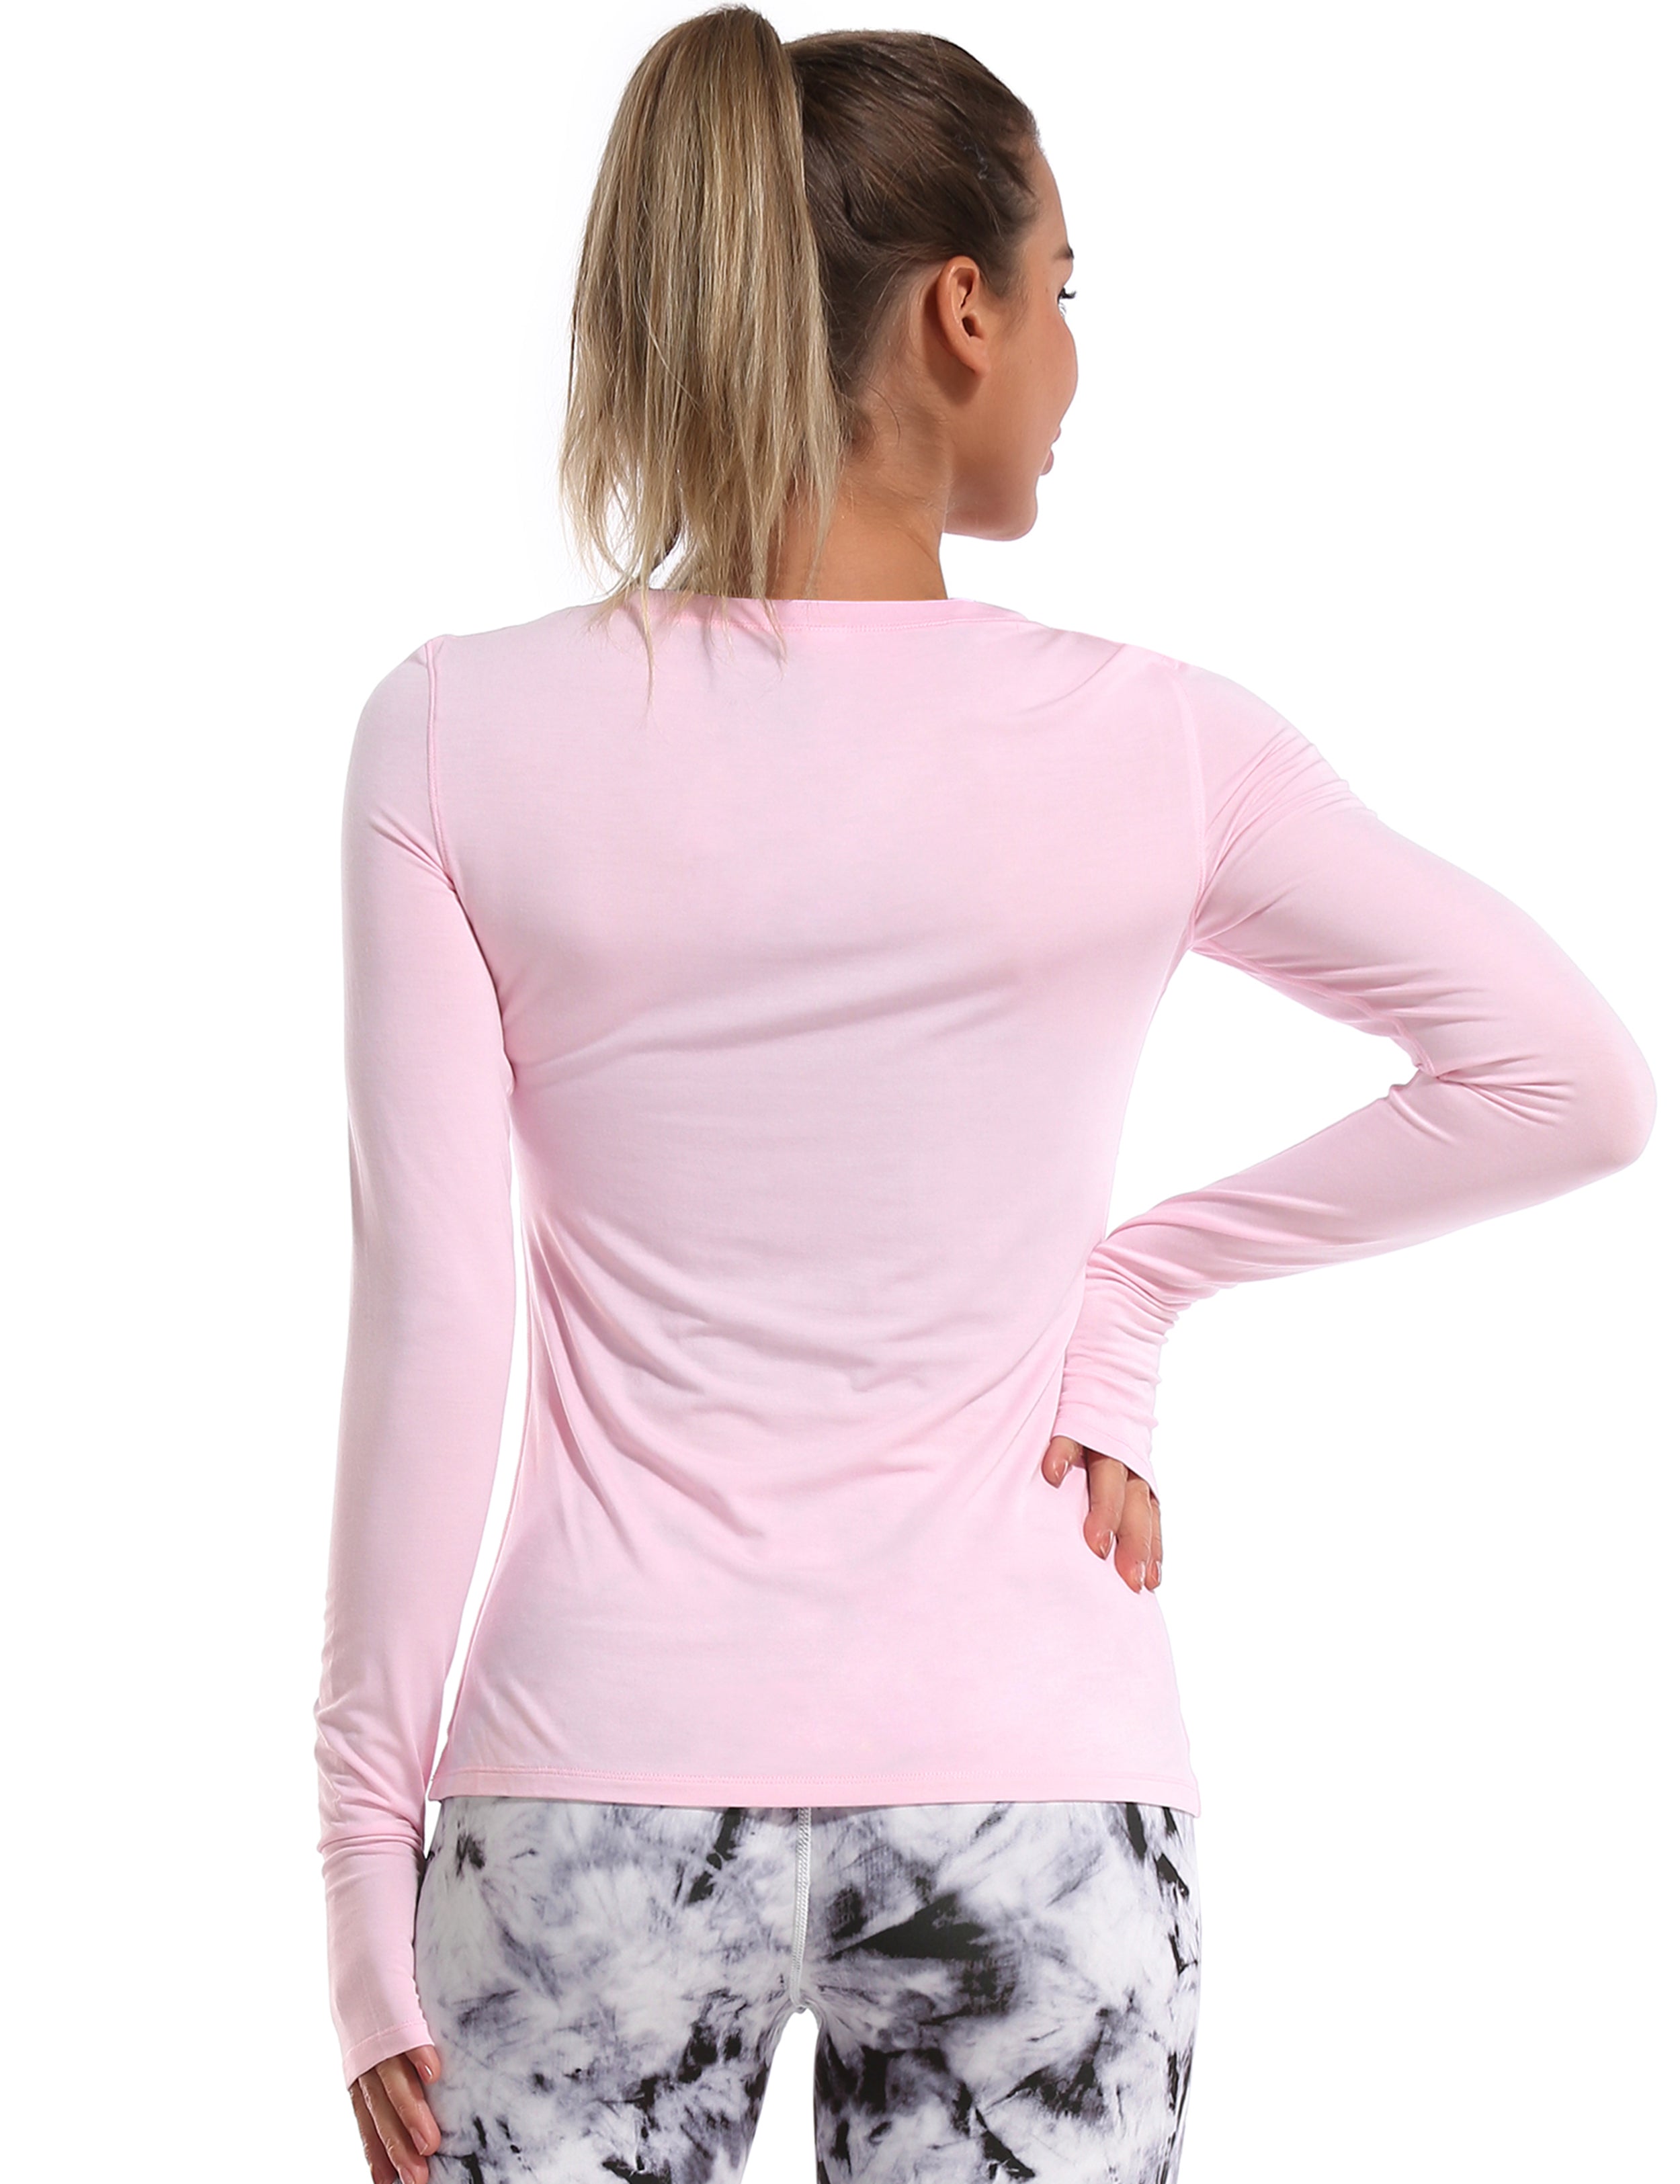 Athlete Long Sleeve Tops lightpink Designed for On the Move Slim fit 93%Modal/7%Spandex Four-way stretch Naturally breathable Super-Soft, Modal Fabric